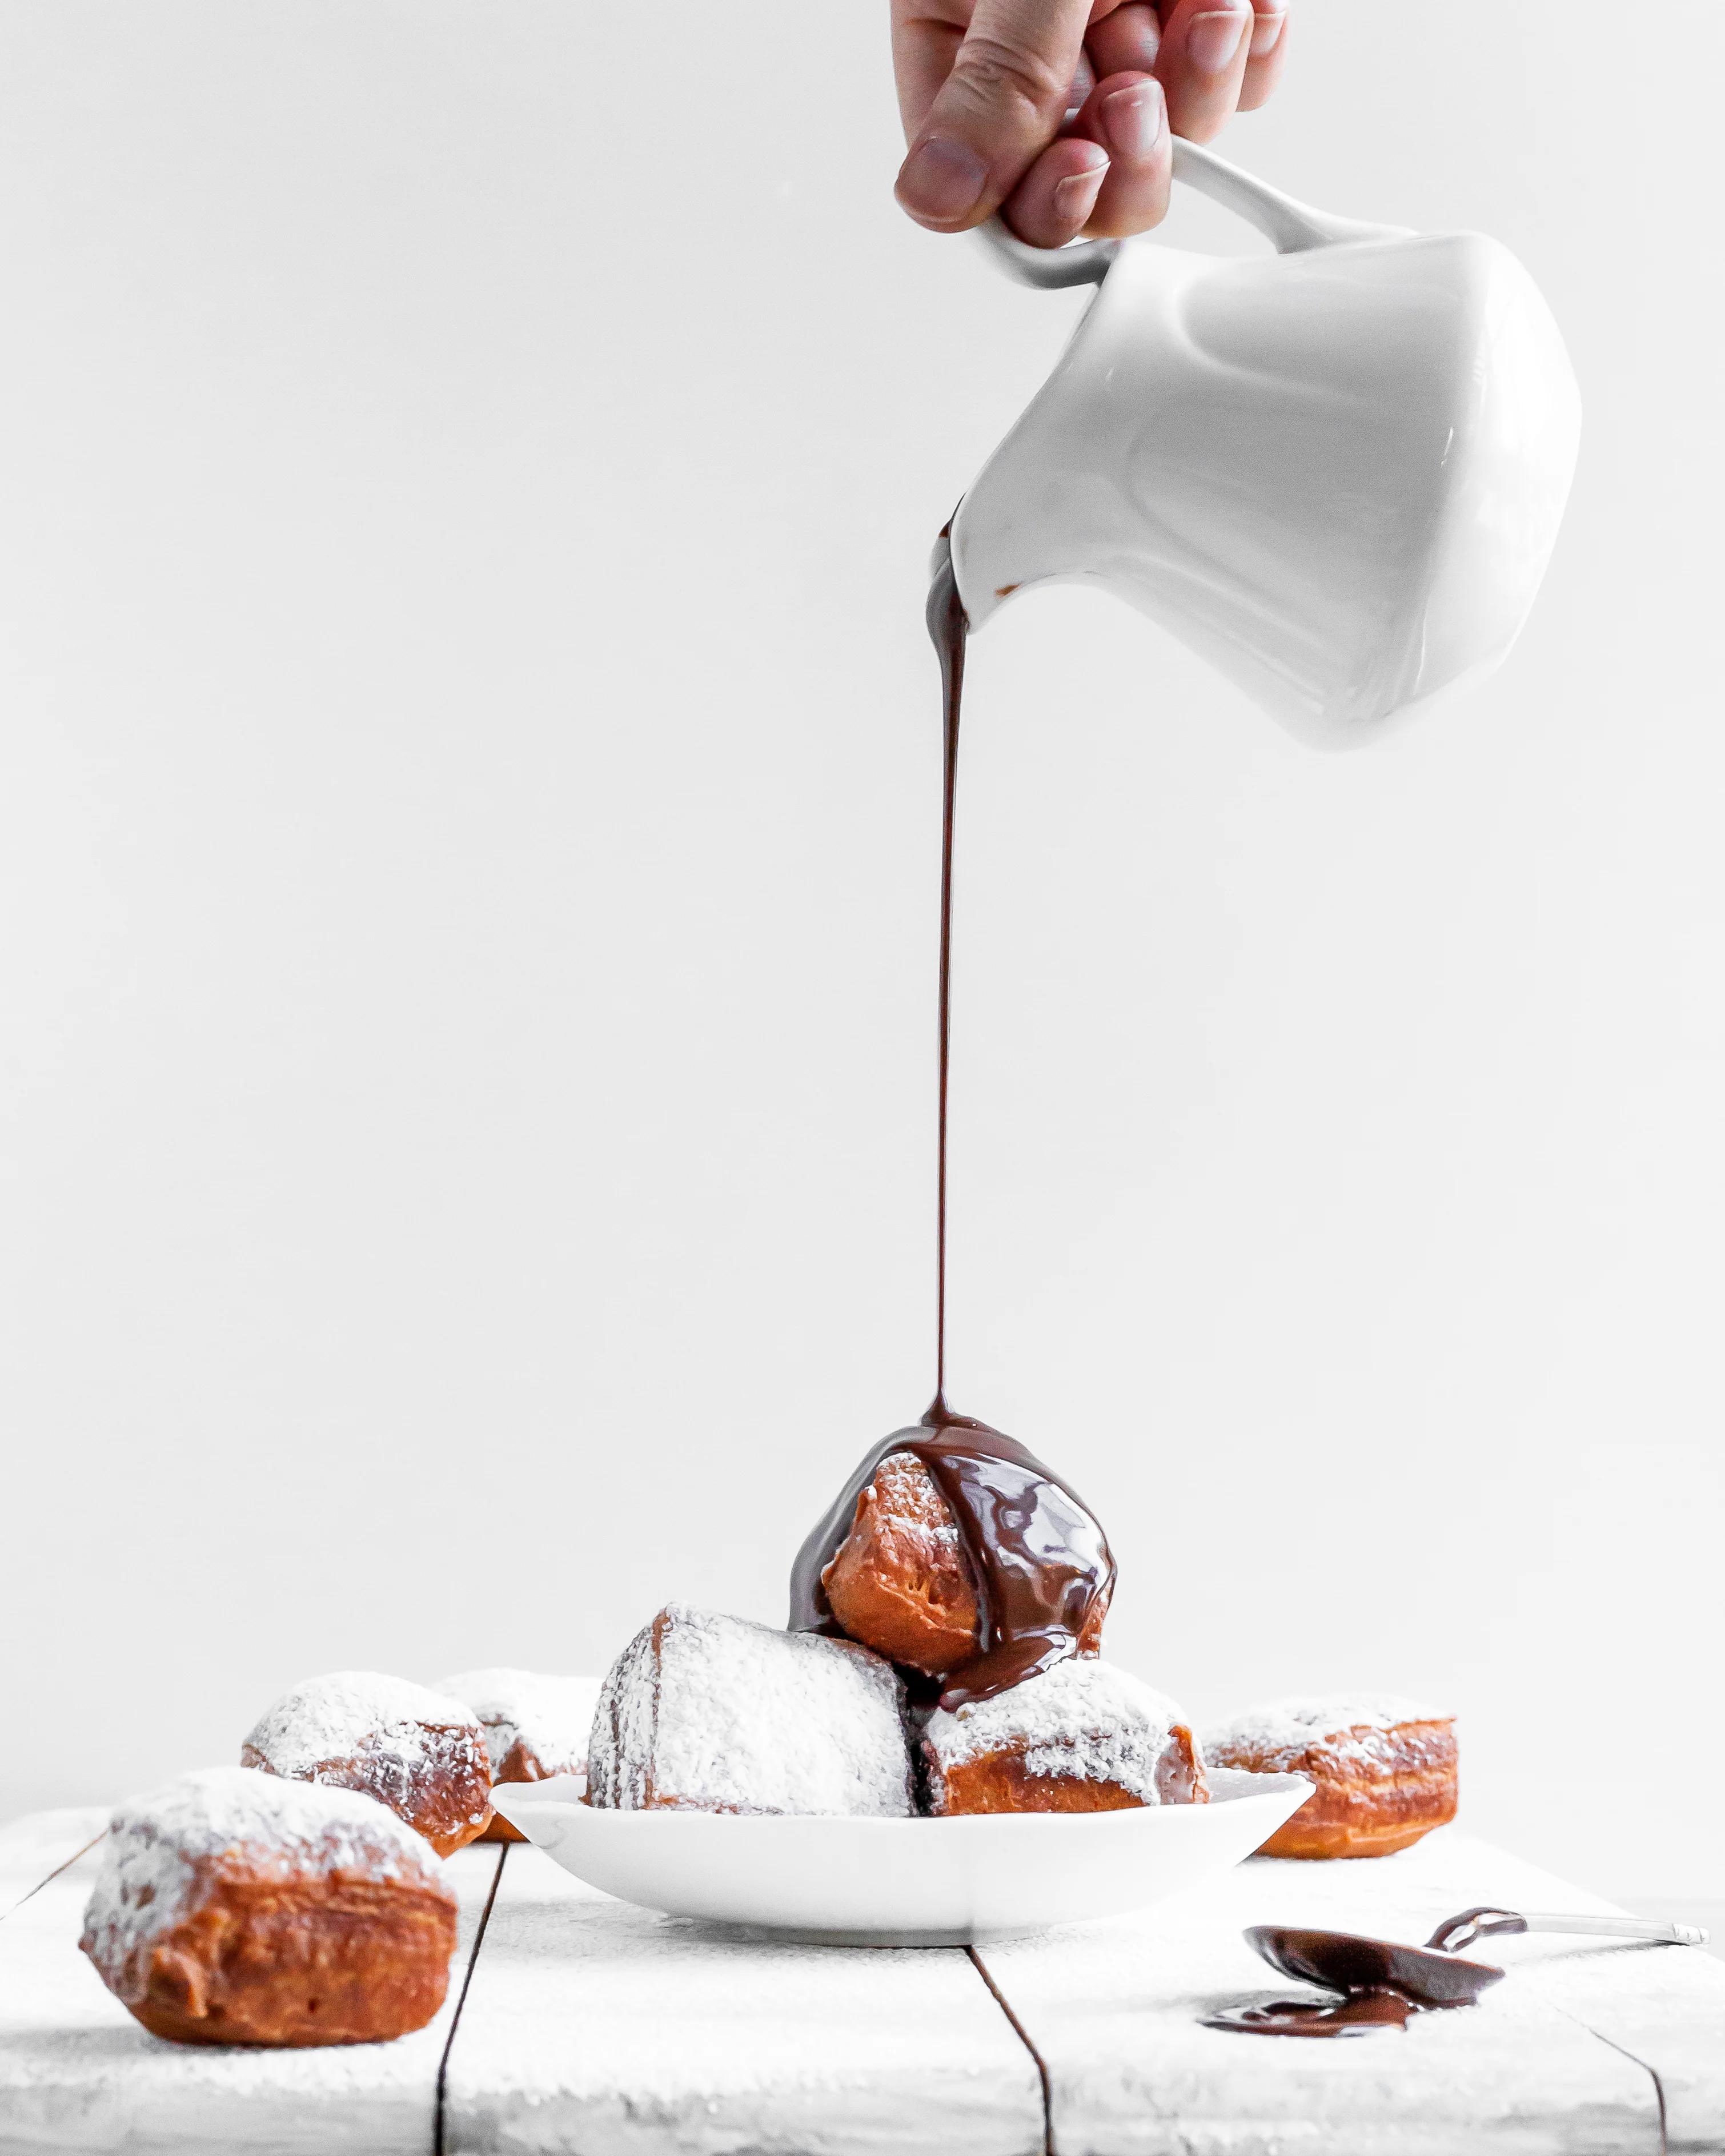 Vegan Beignets being covered in chocolate sauce